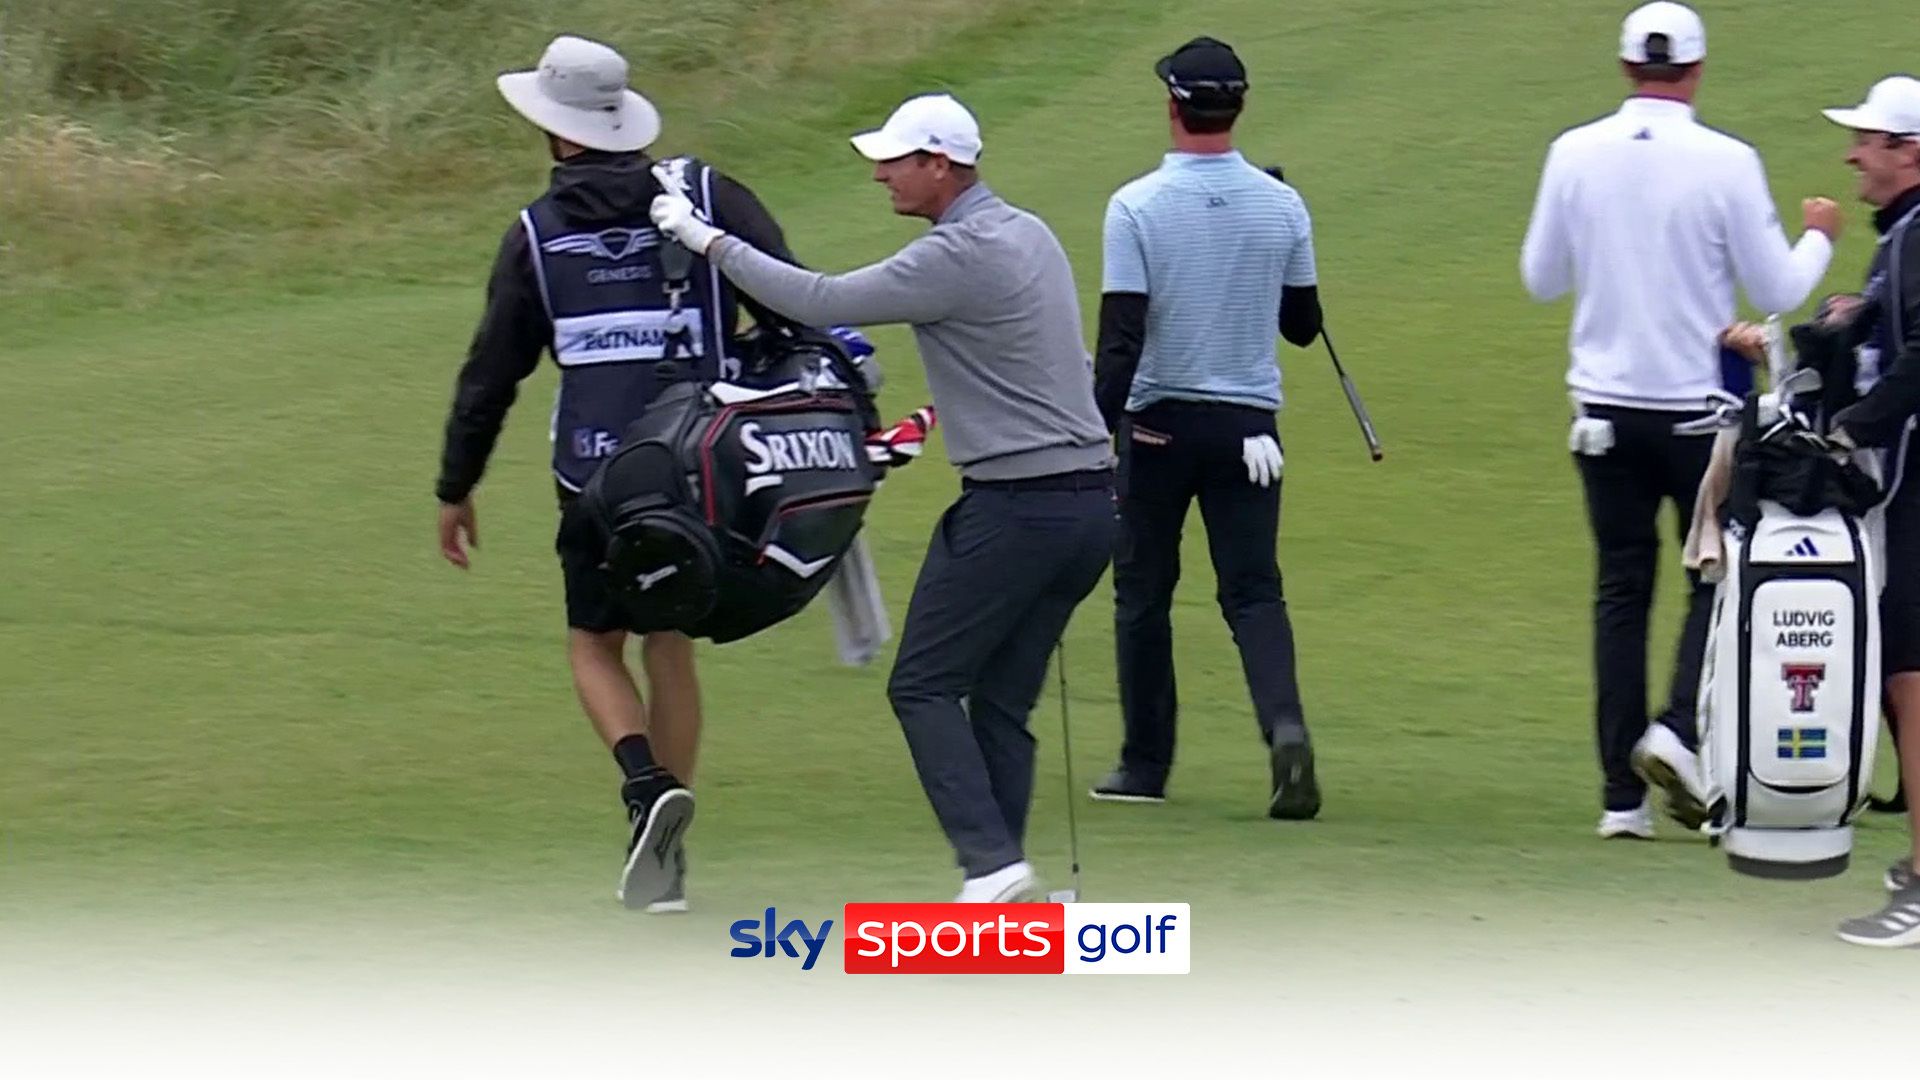 'My first one!' | Colsaerts celebrates stunning hole in one!